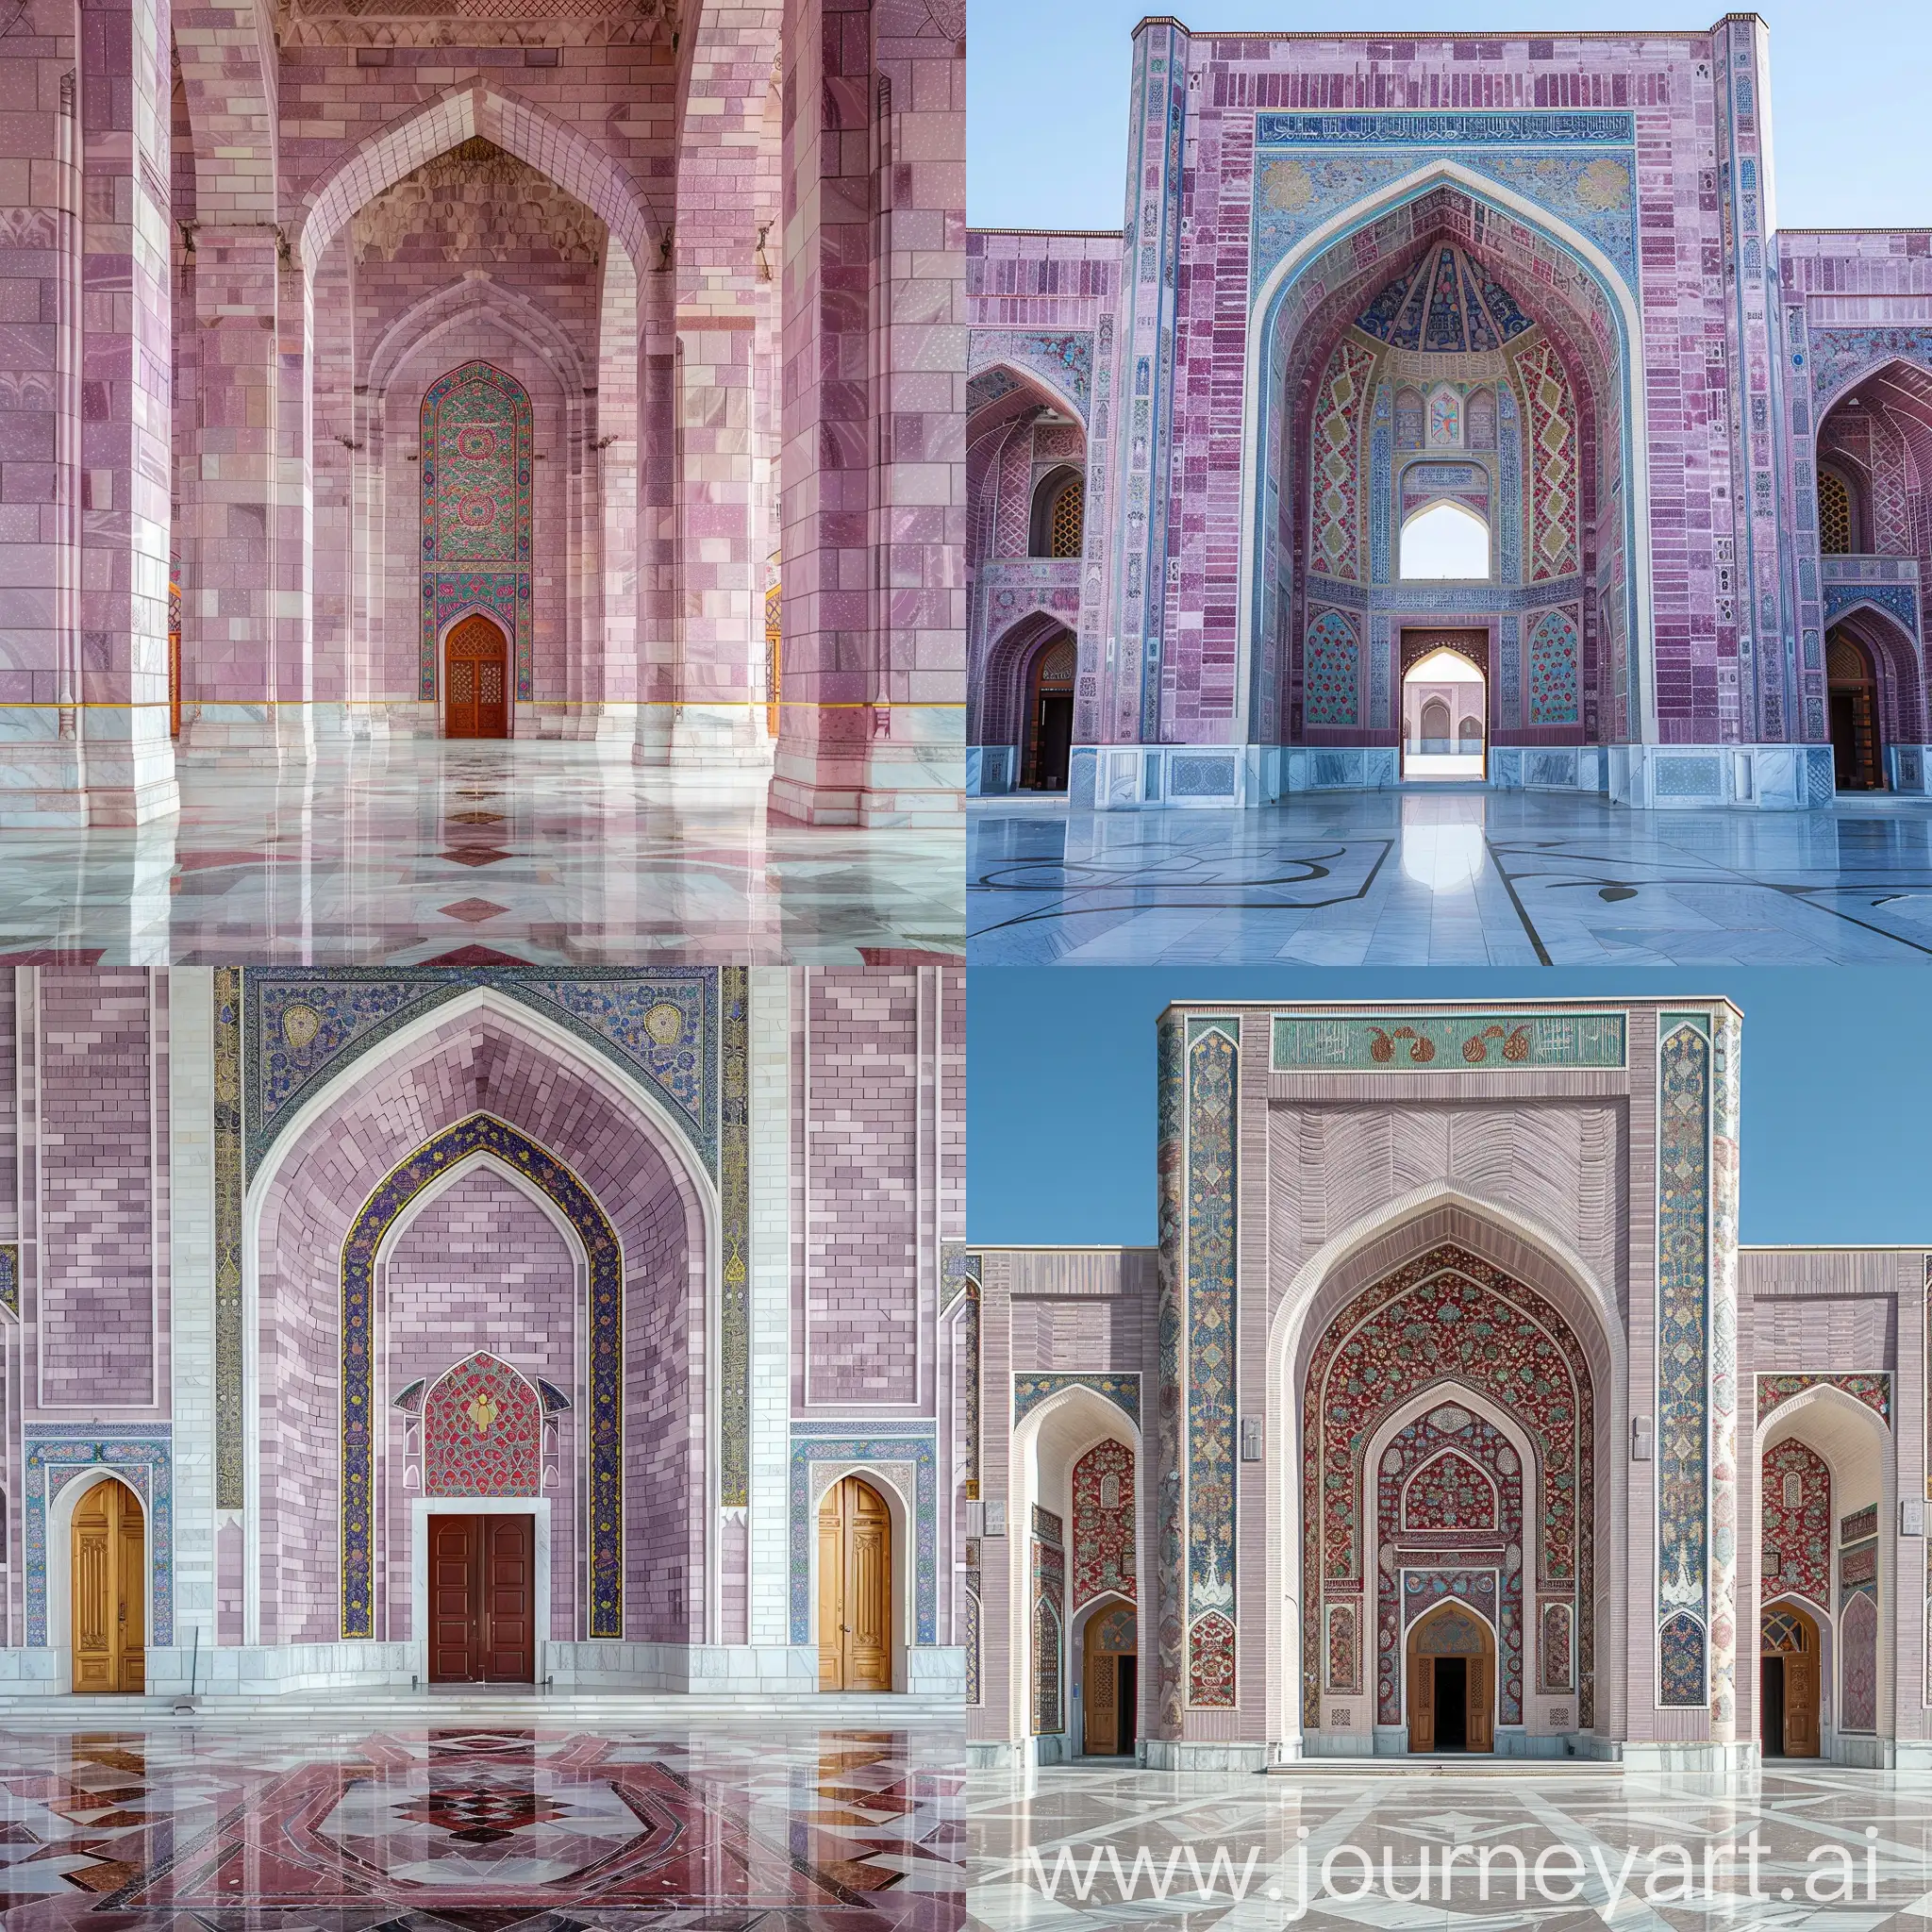 an Uzbekistan Mosque, Lavender color brick marbled, Timurid influences, Tall iwan, red blue persian design on white spandrels, shiny golden ornaments, Full view